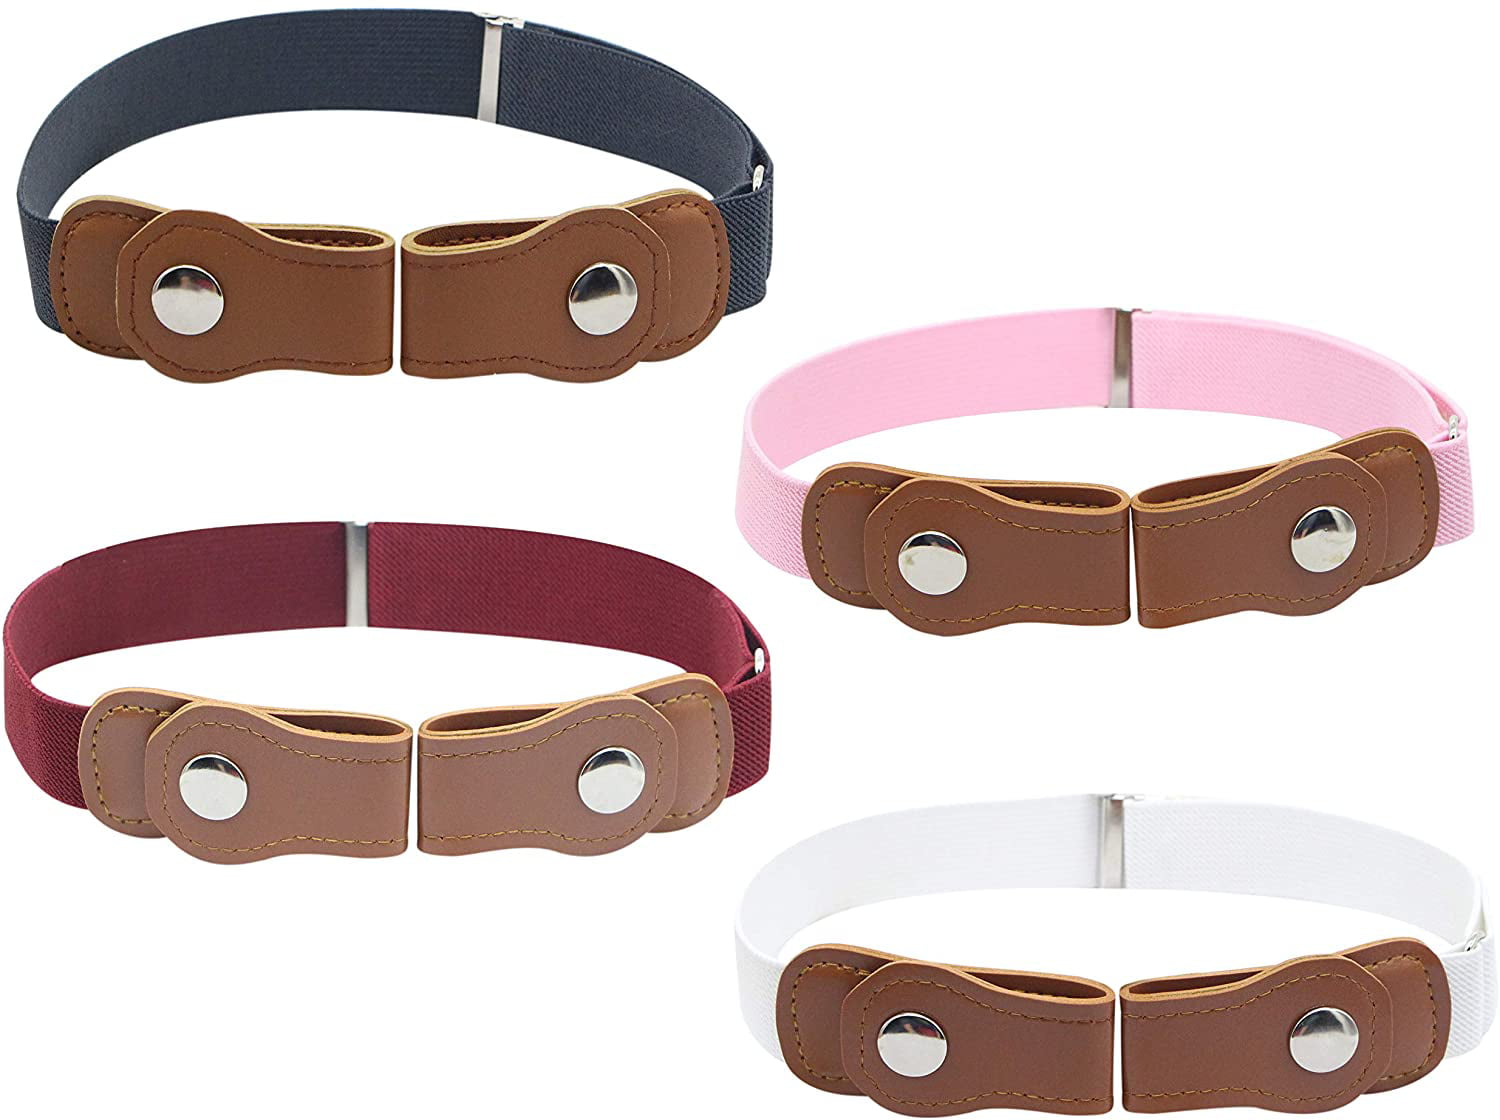 4-Pack Elastic Stretch Fit Kids No Buckle Belt Supports Independent Toddlers Designer Comfort for Boys and Girls 